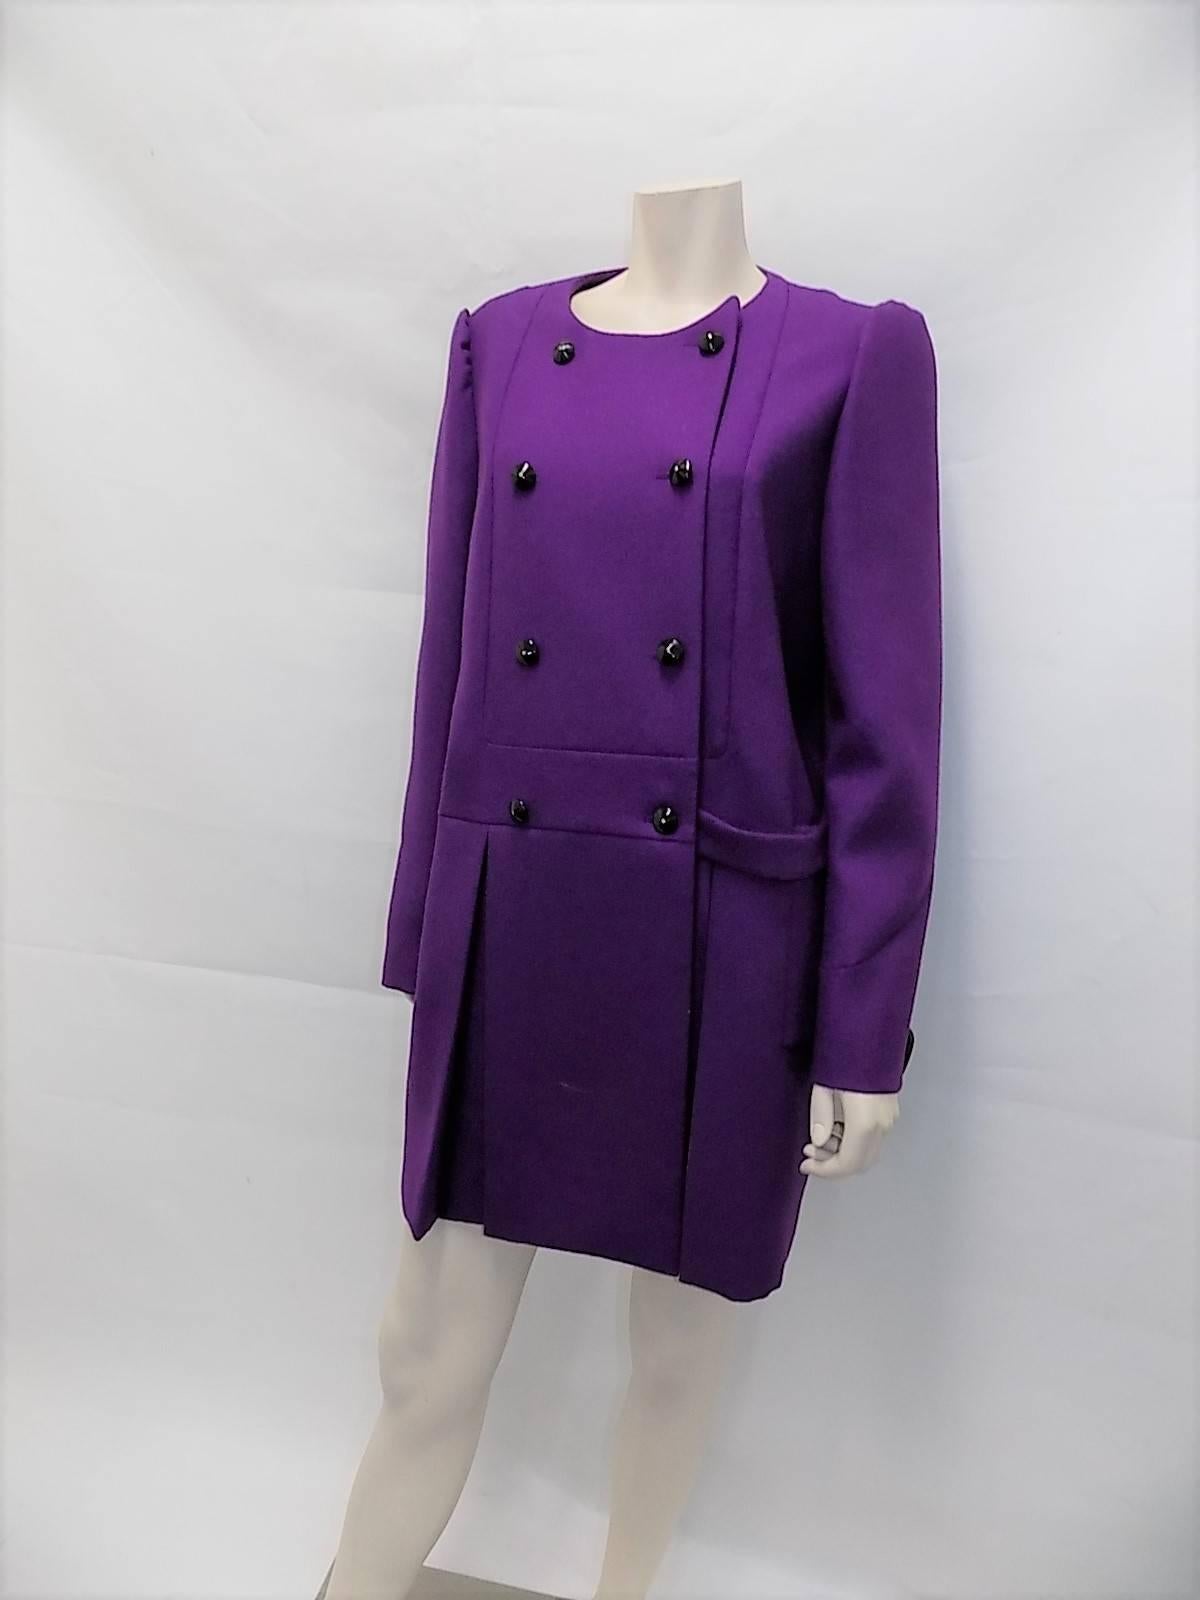 Collection fall winter 2011 beautiful wool  New With Tags Yves Saint Laurent Purple  Coat featurinf double breasted closure With  cone shaped  Leather Buttons, Two front deep pleats and half drop belt detail. Very stylish and chic! 
Size 46

Bust